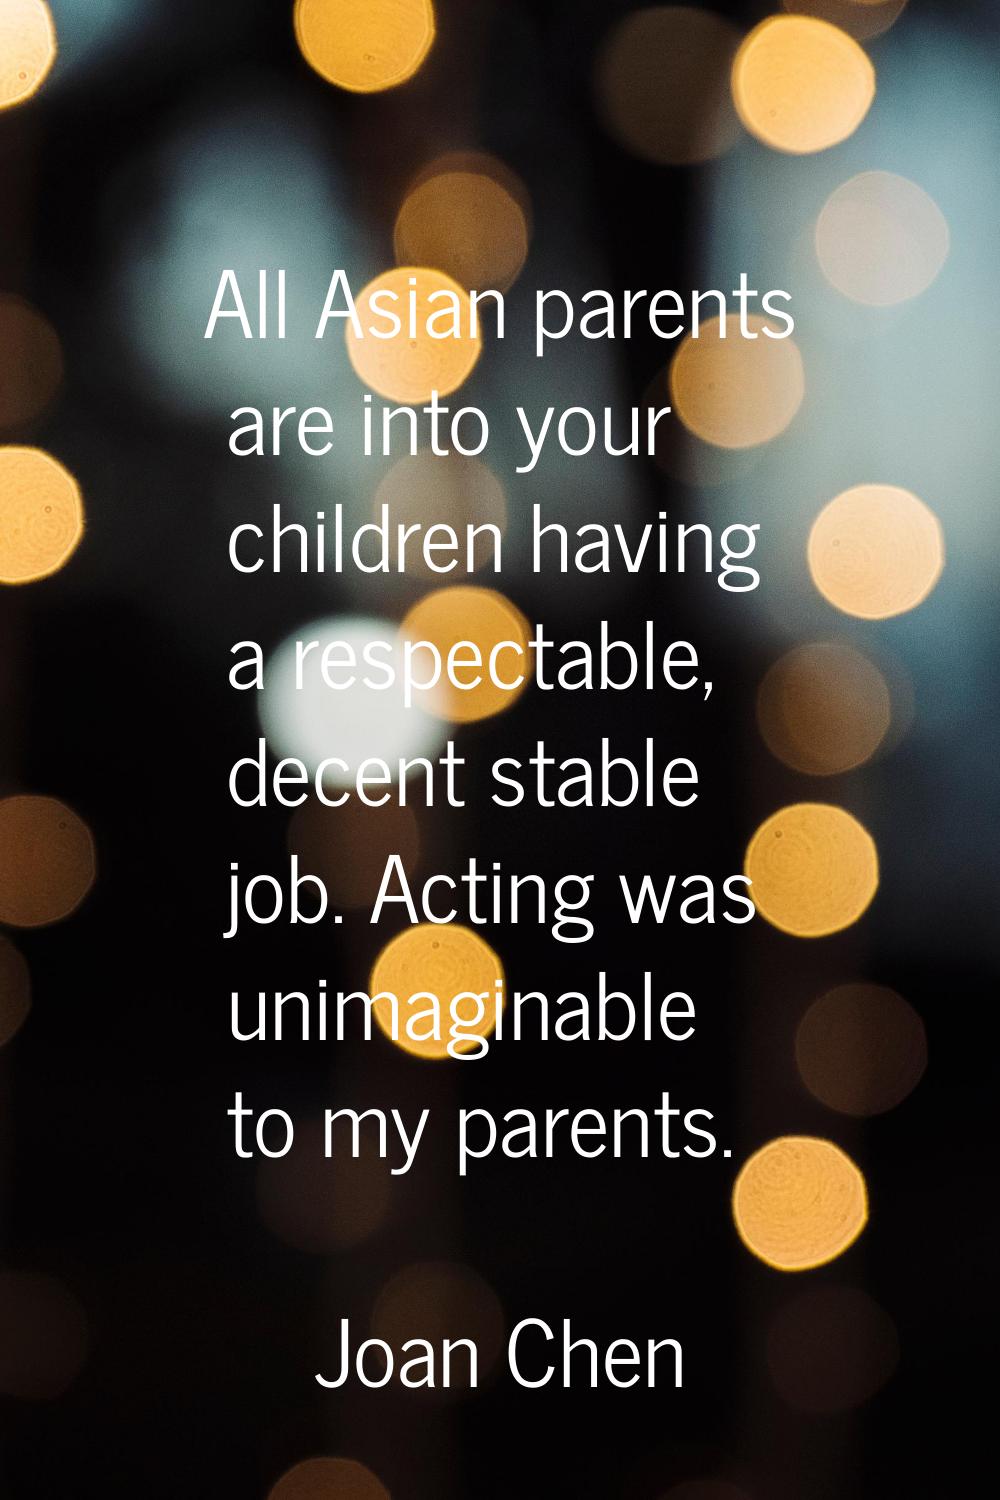 All Asian parents are into your children having a respectable, decent stable job. Acting was unimag